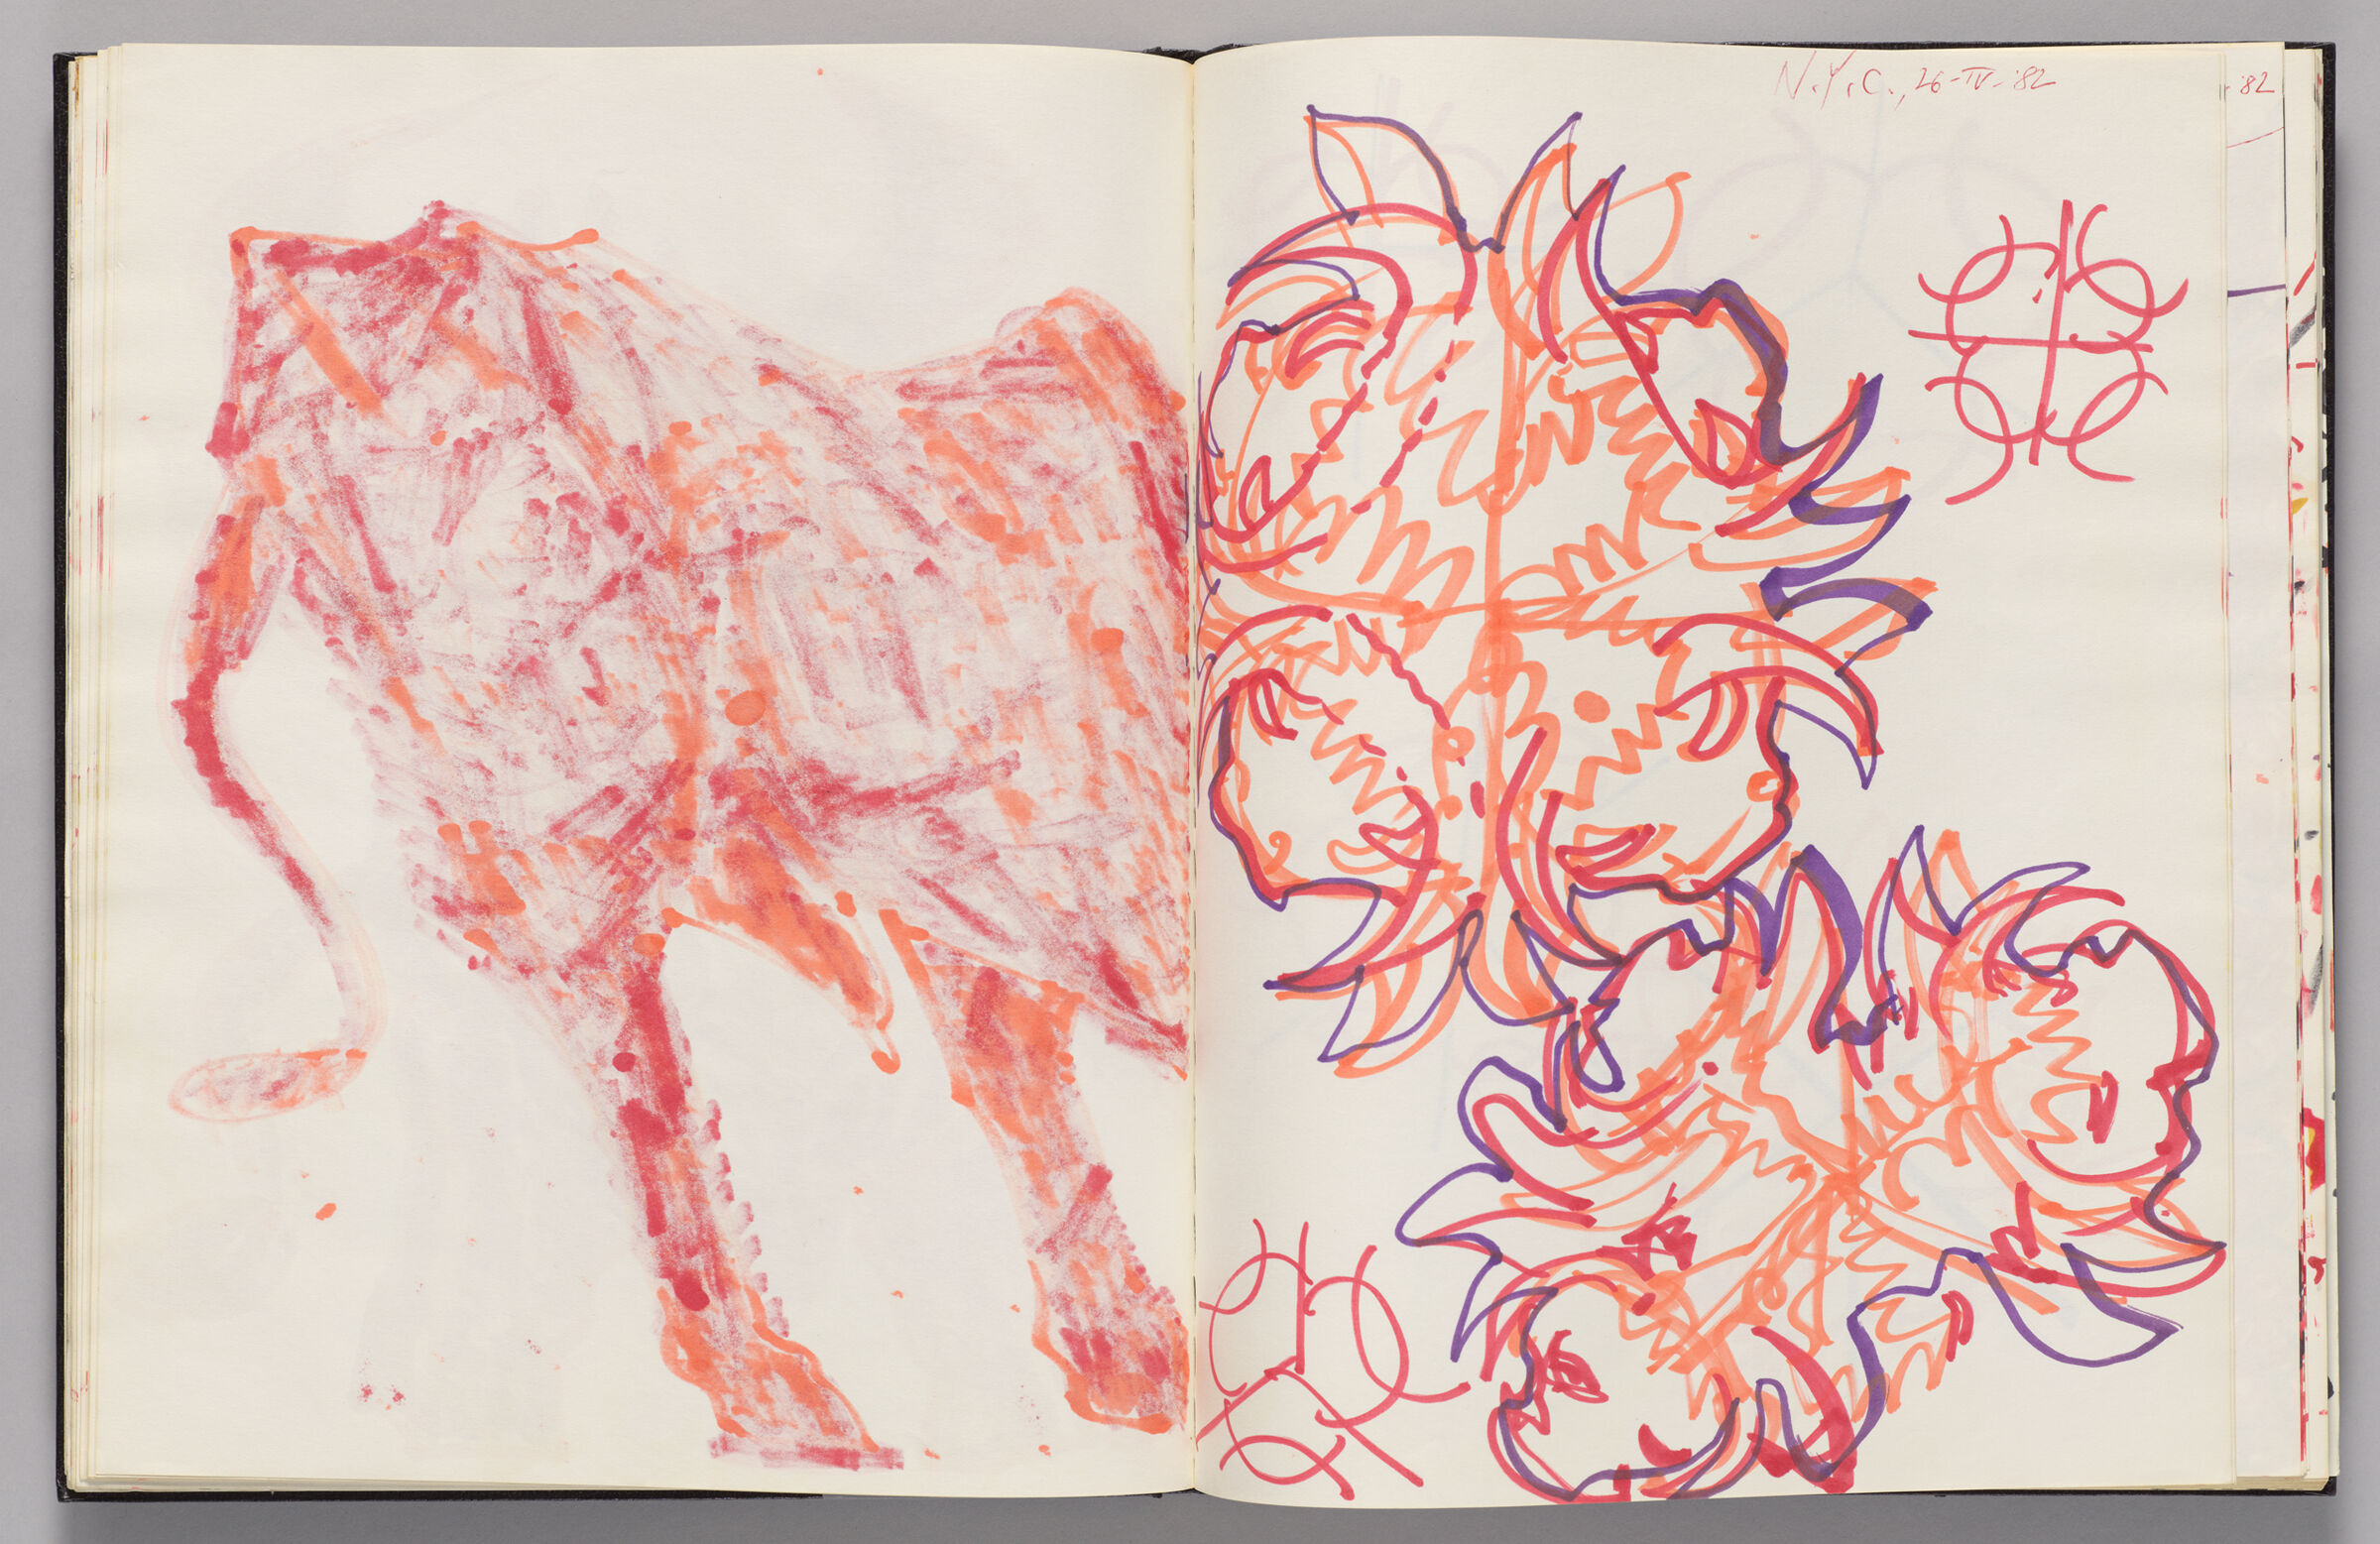 Untitled (Bleed-Through Of Minotaur Body, Left Page); Untitled (Minatour Heads, Right Page)